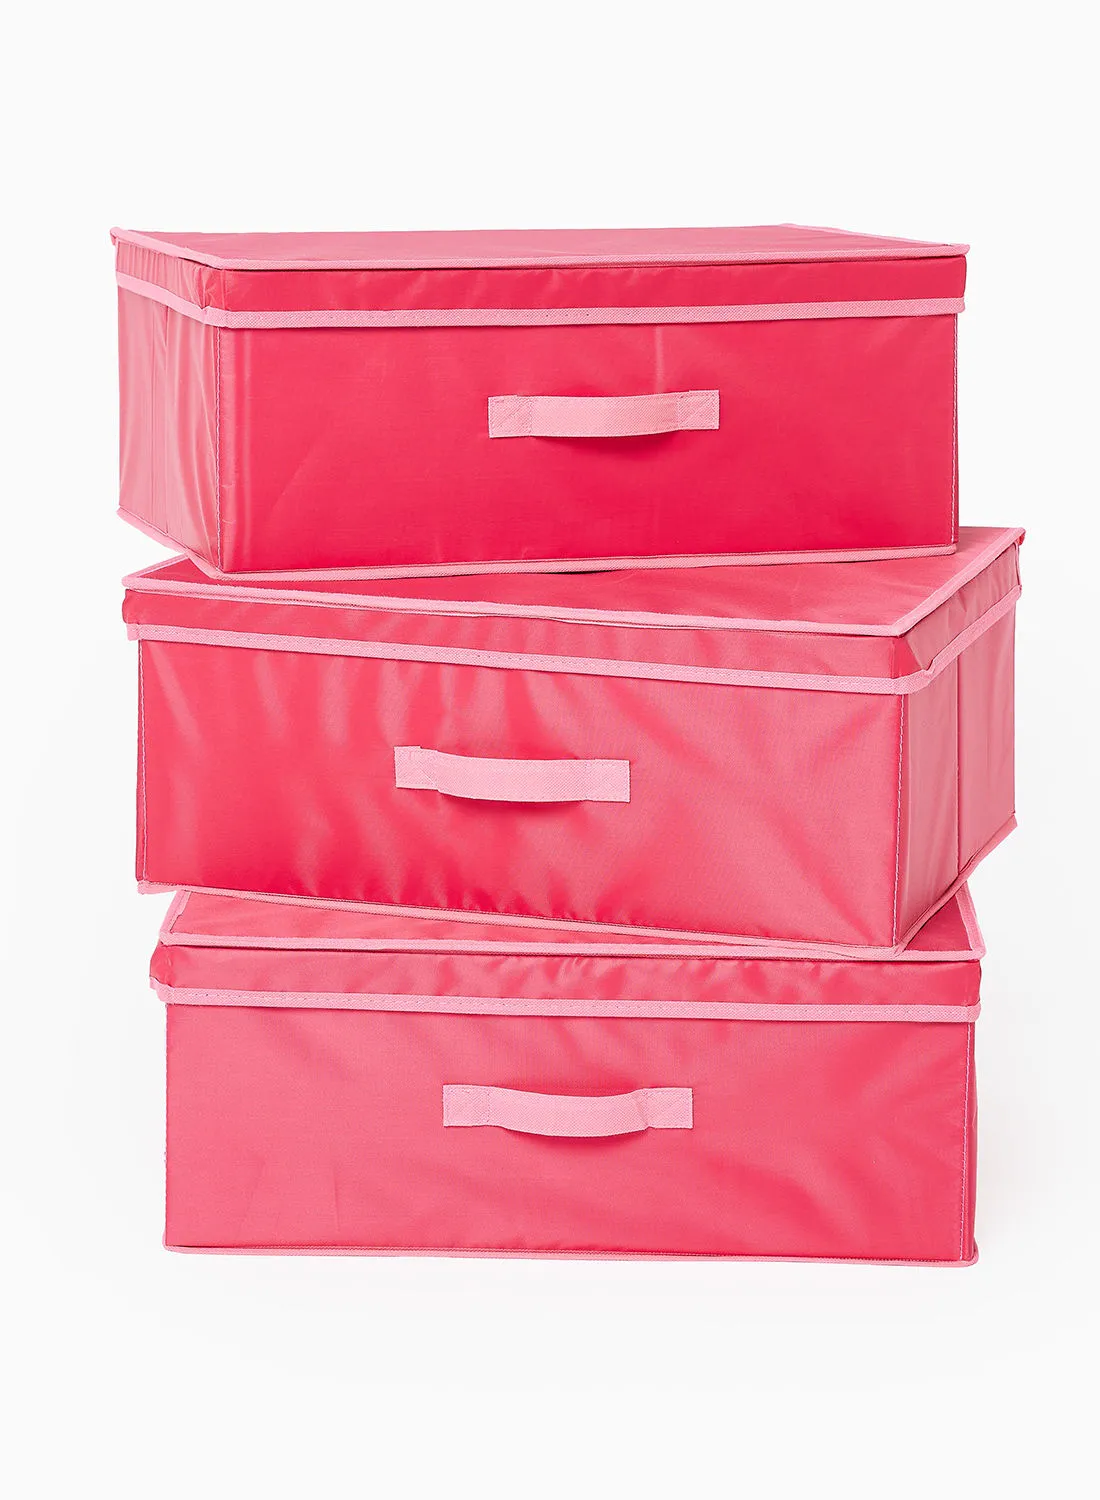 Amal Foldable Storage Organizer In Set Of 3 With Top Zipper And Handles Rose Red 50X40X20cm